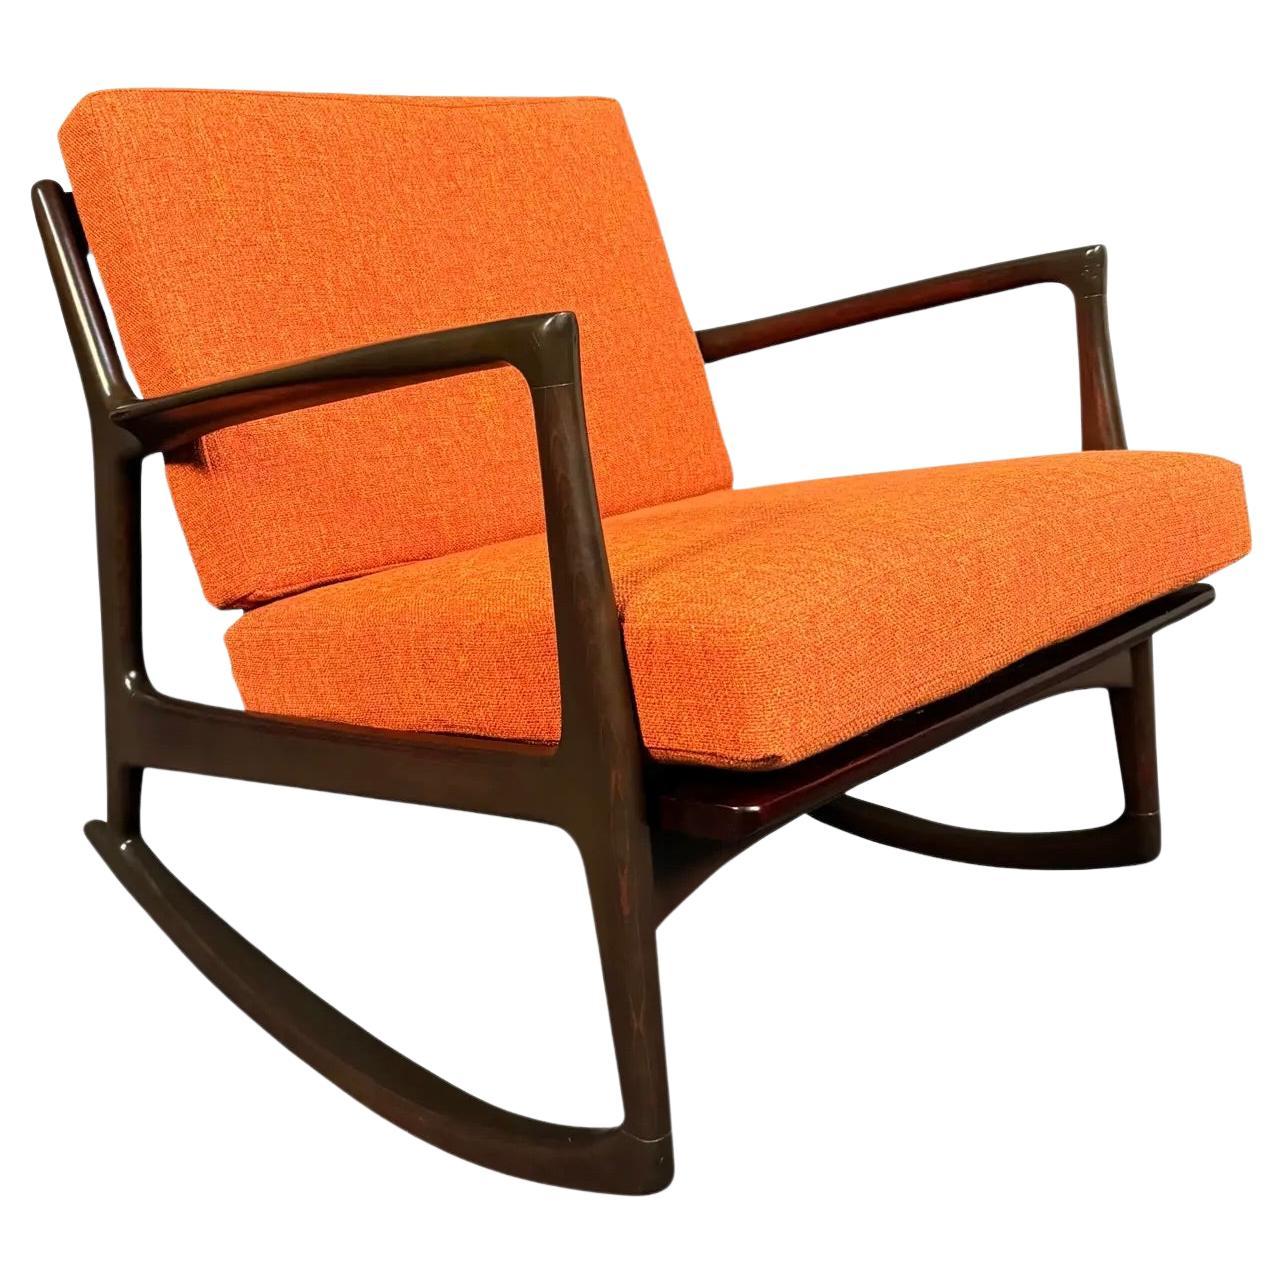 Vintage Danish Mid Century Modern Rocking Chair by Kofod Larsen for Selig For Sale